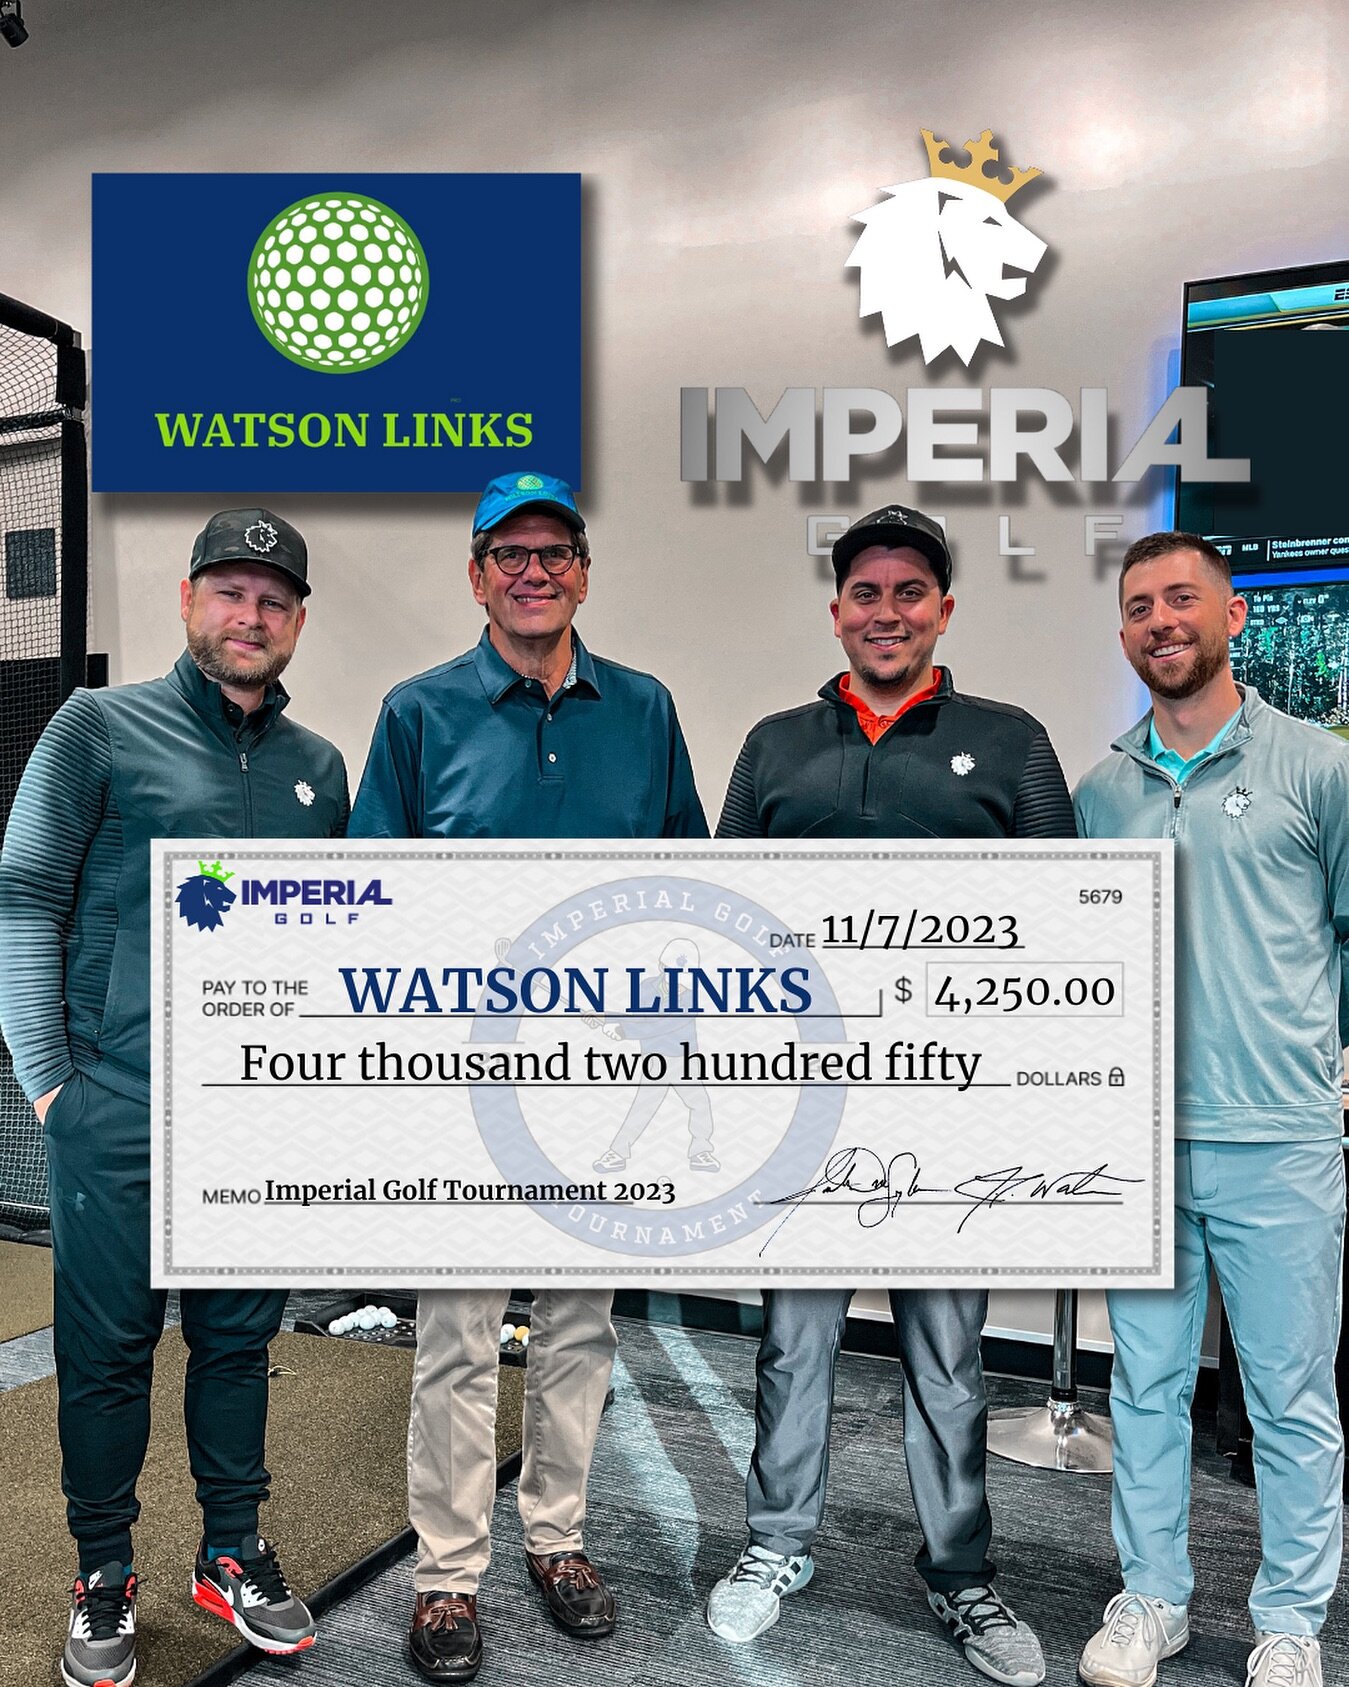 - A message from the Watson Links team - 

🏌🏼&zwj;♂️⛳️ A HUGE Thank you to Imperial Golf for teeing up a fantastic day of support for Watson Links Mentors Foundation! 

We&rsquo;re incredibly grateful to Jon Snyder, J.T. Watson, Brandon Trytek, and